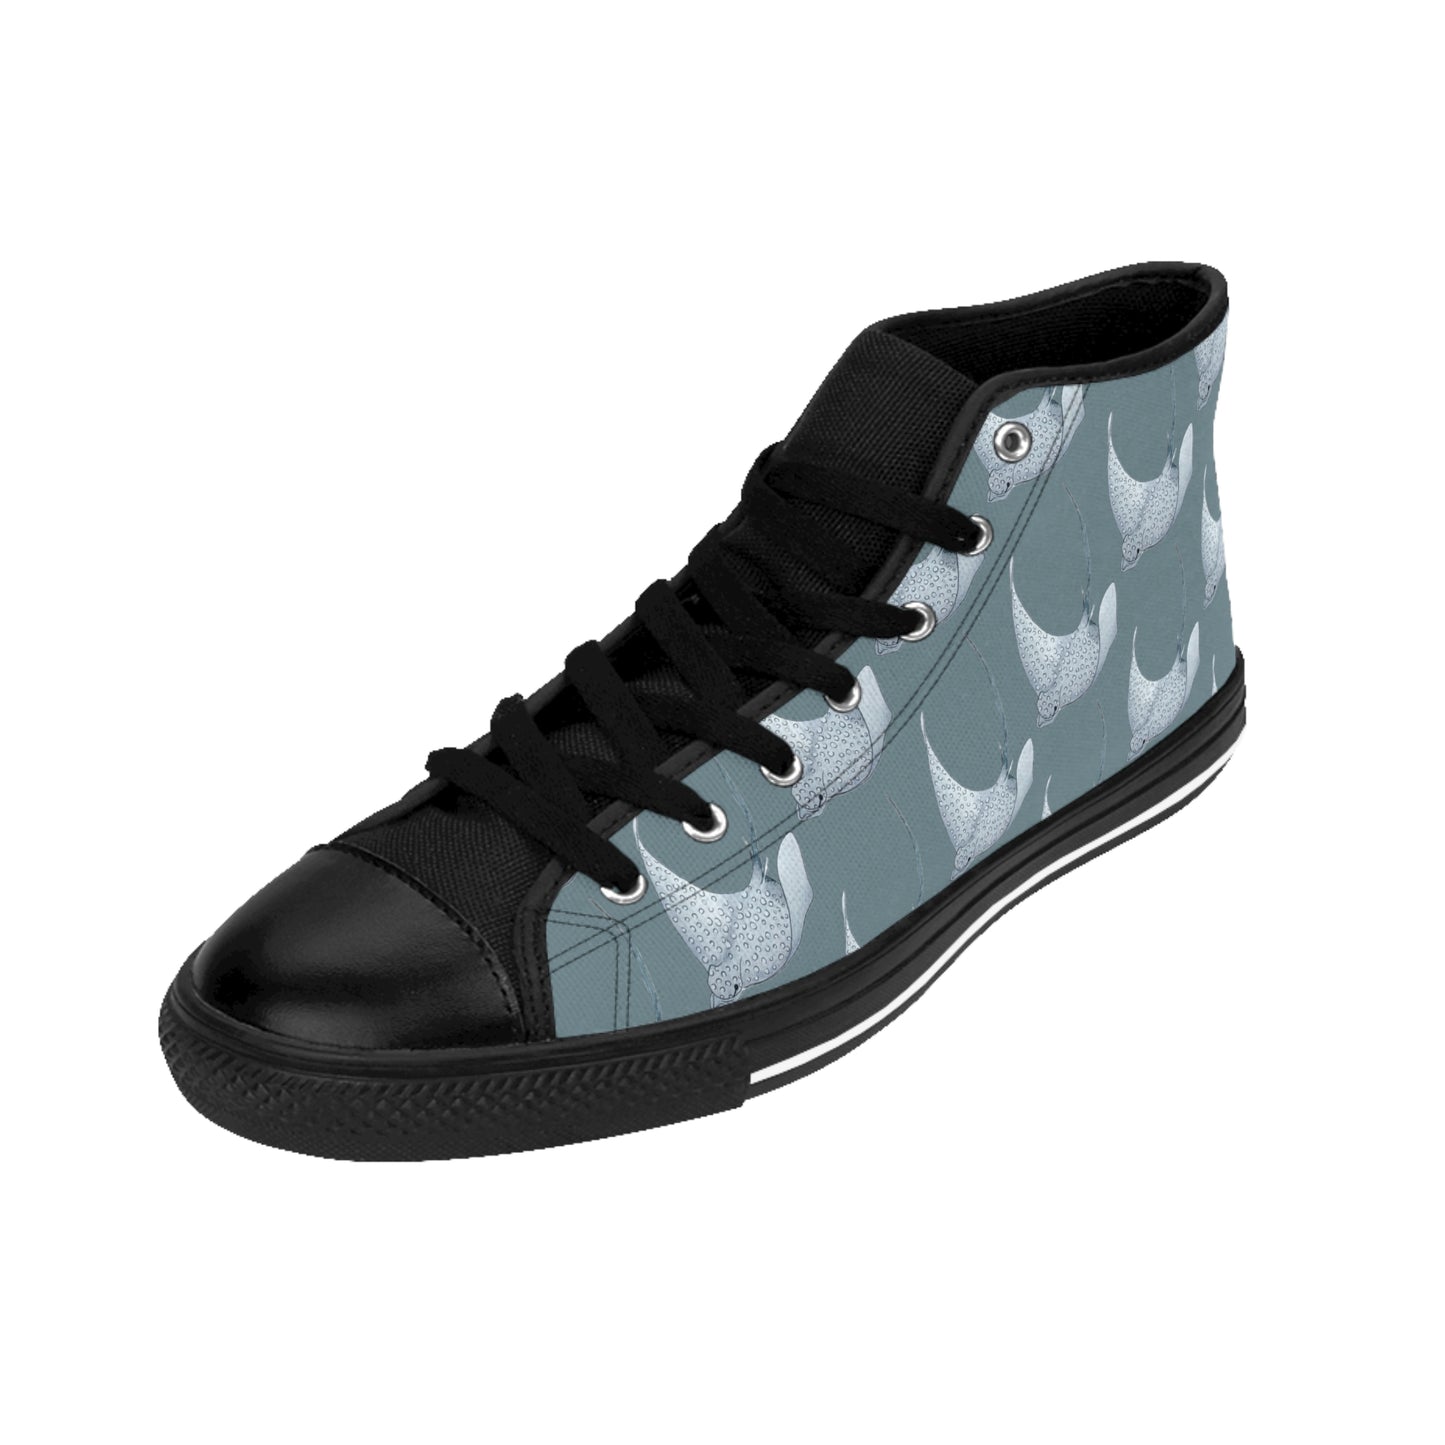 Sargasso Sea - Classic Sneakers - Storm